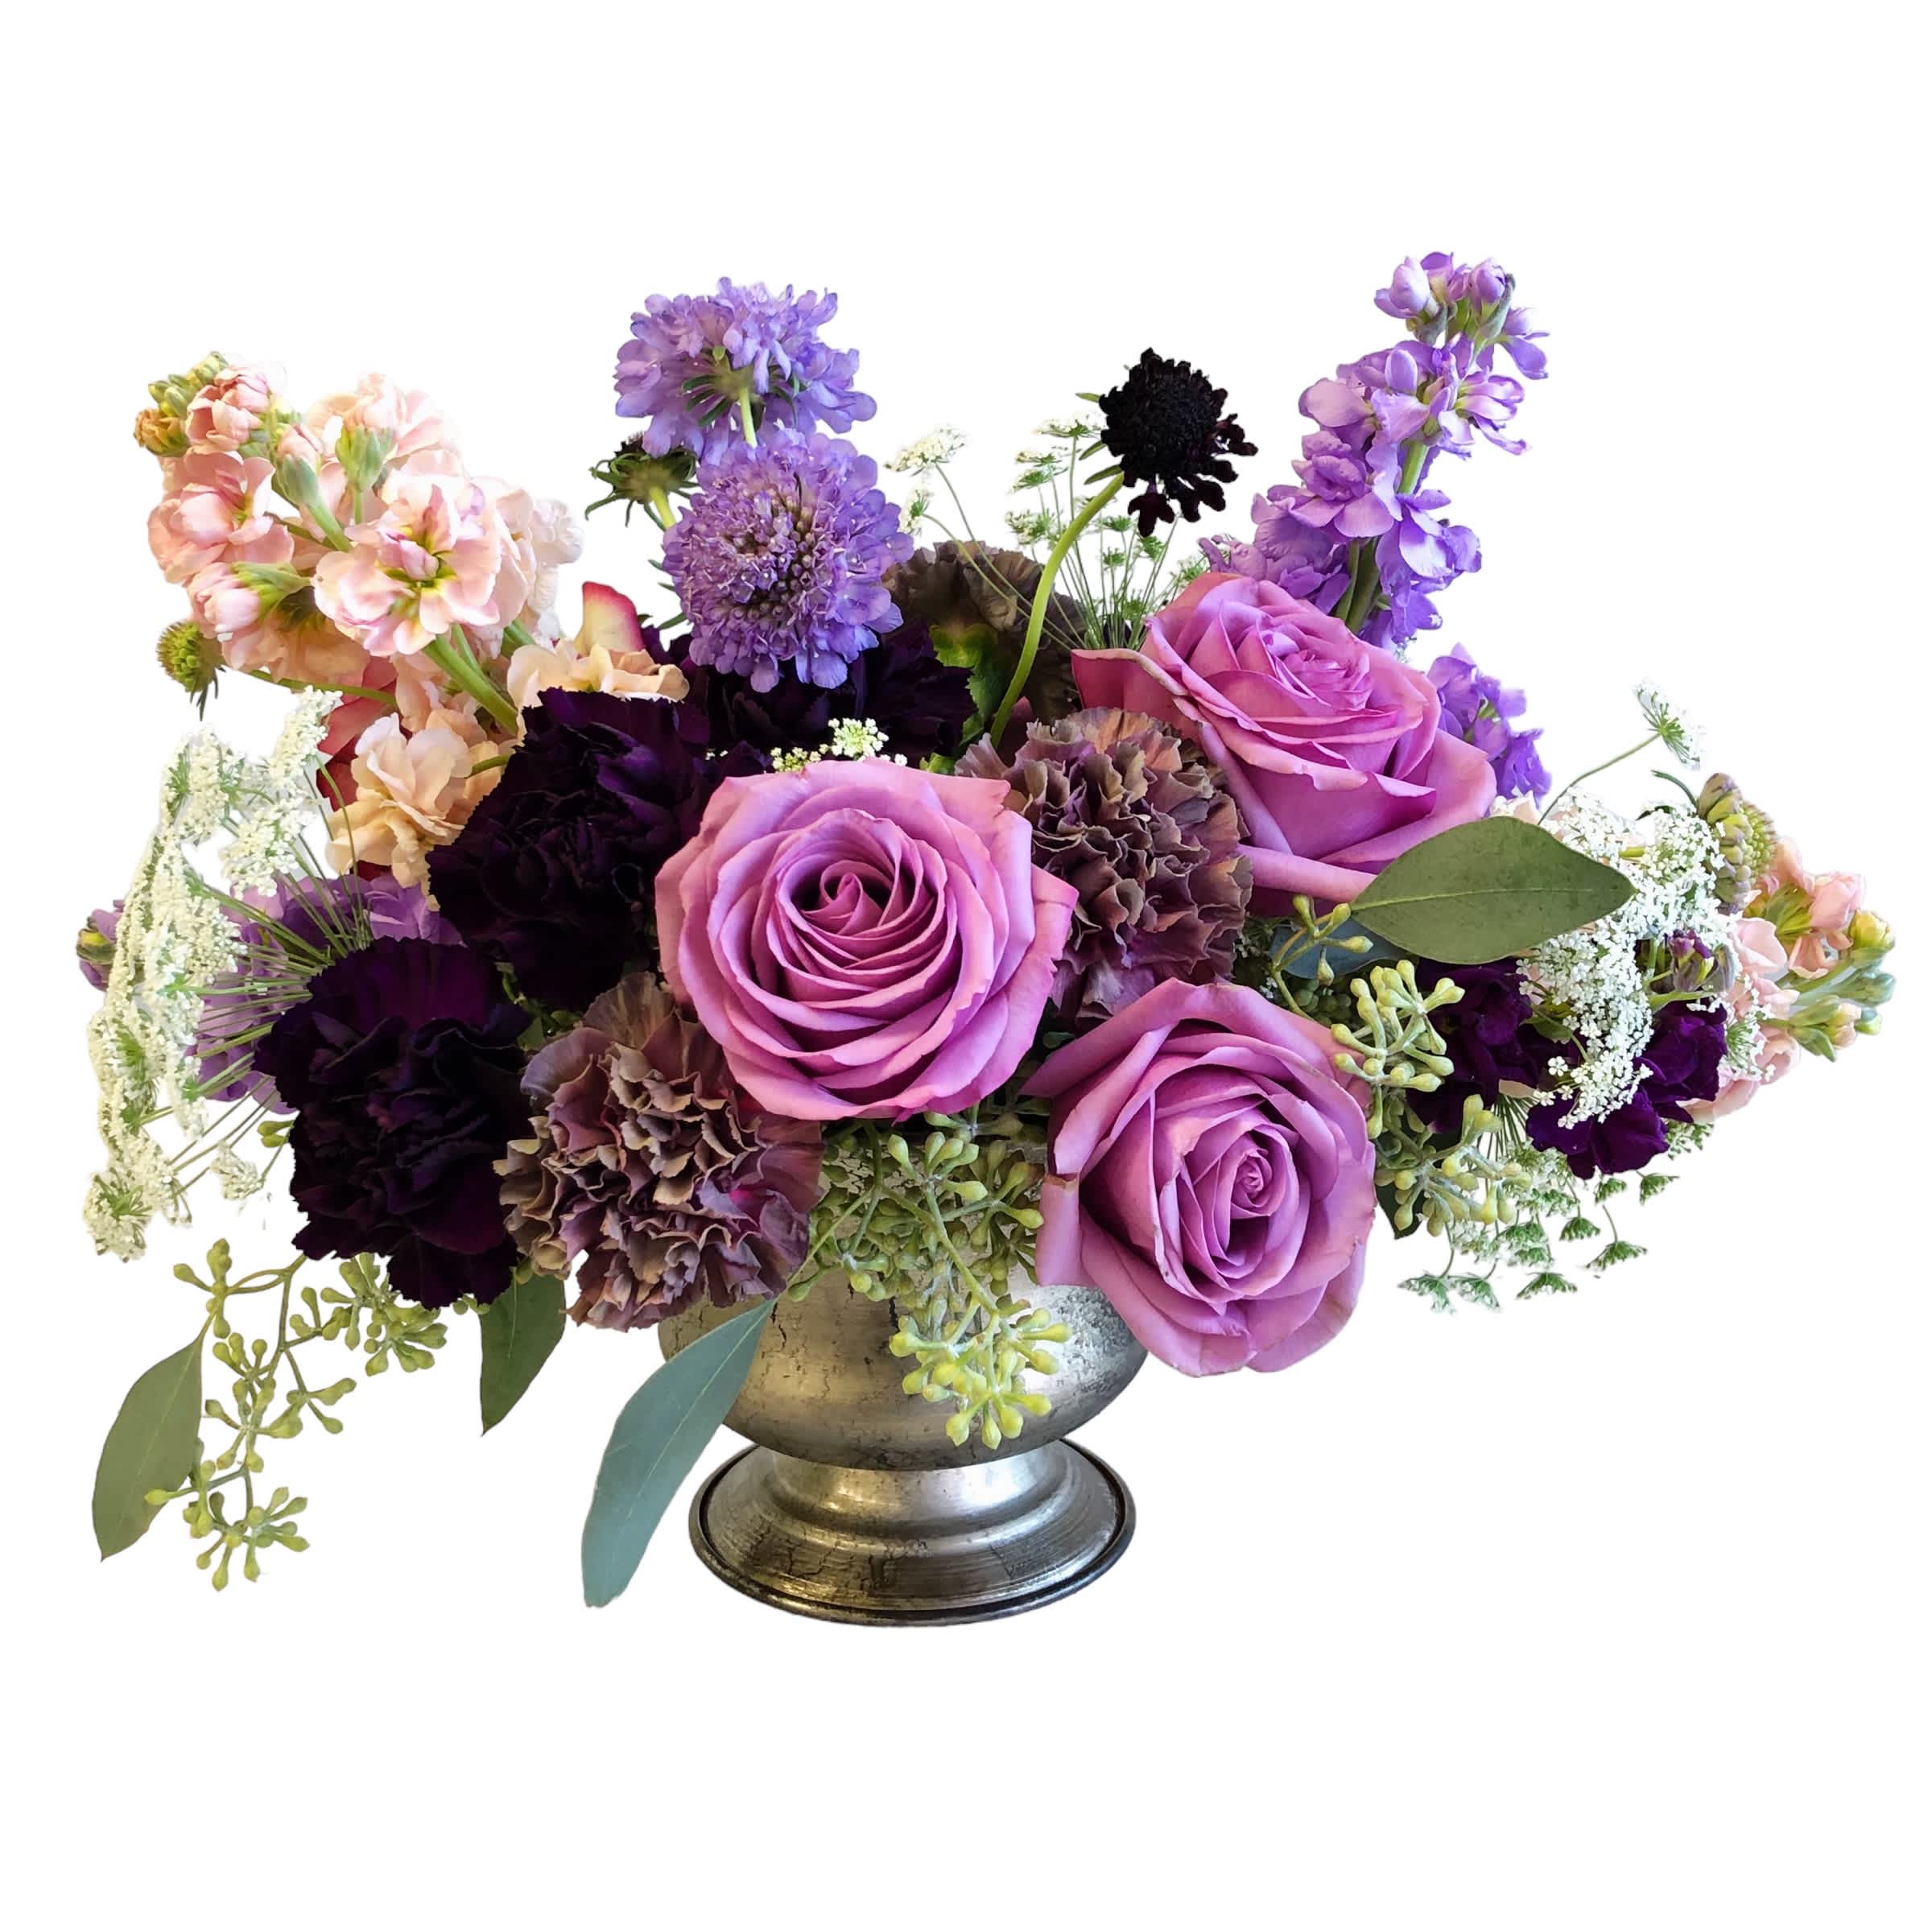 Lovely In Purple - Mix of Roses, Carnations, Stock, and Scabiosa in a lovely compote